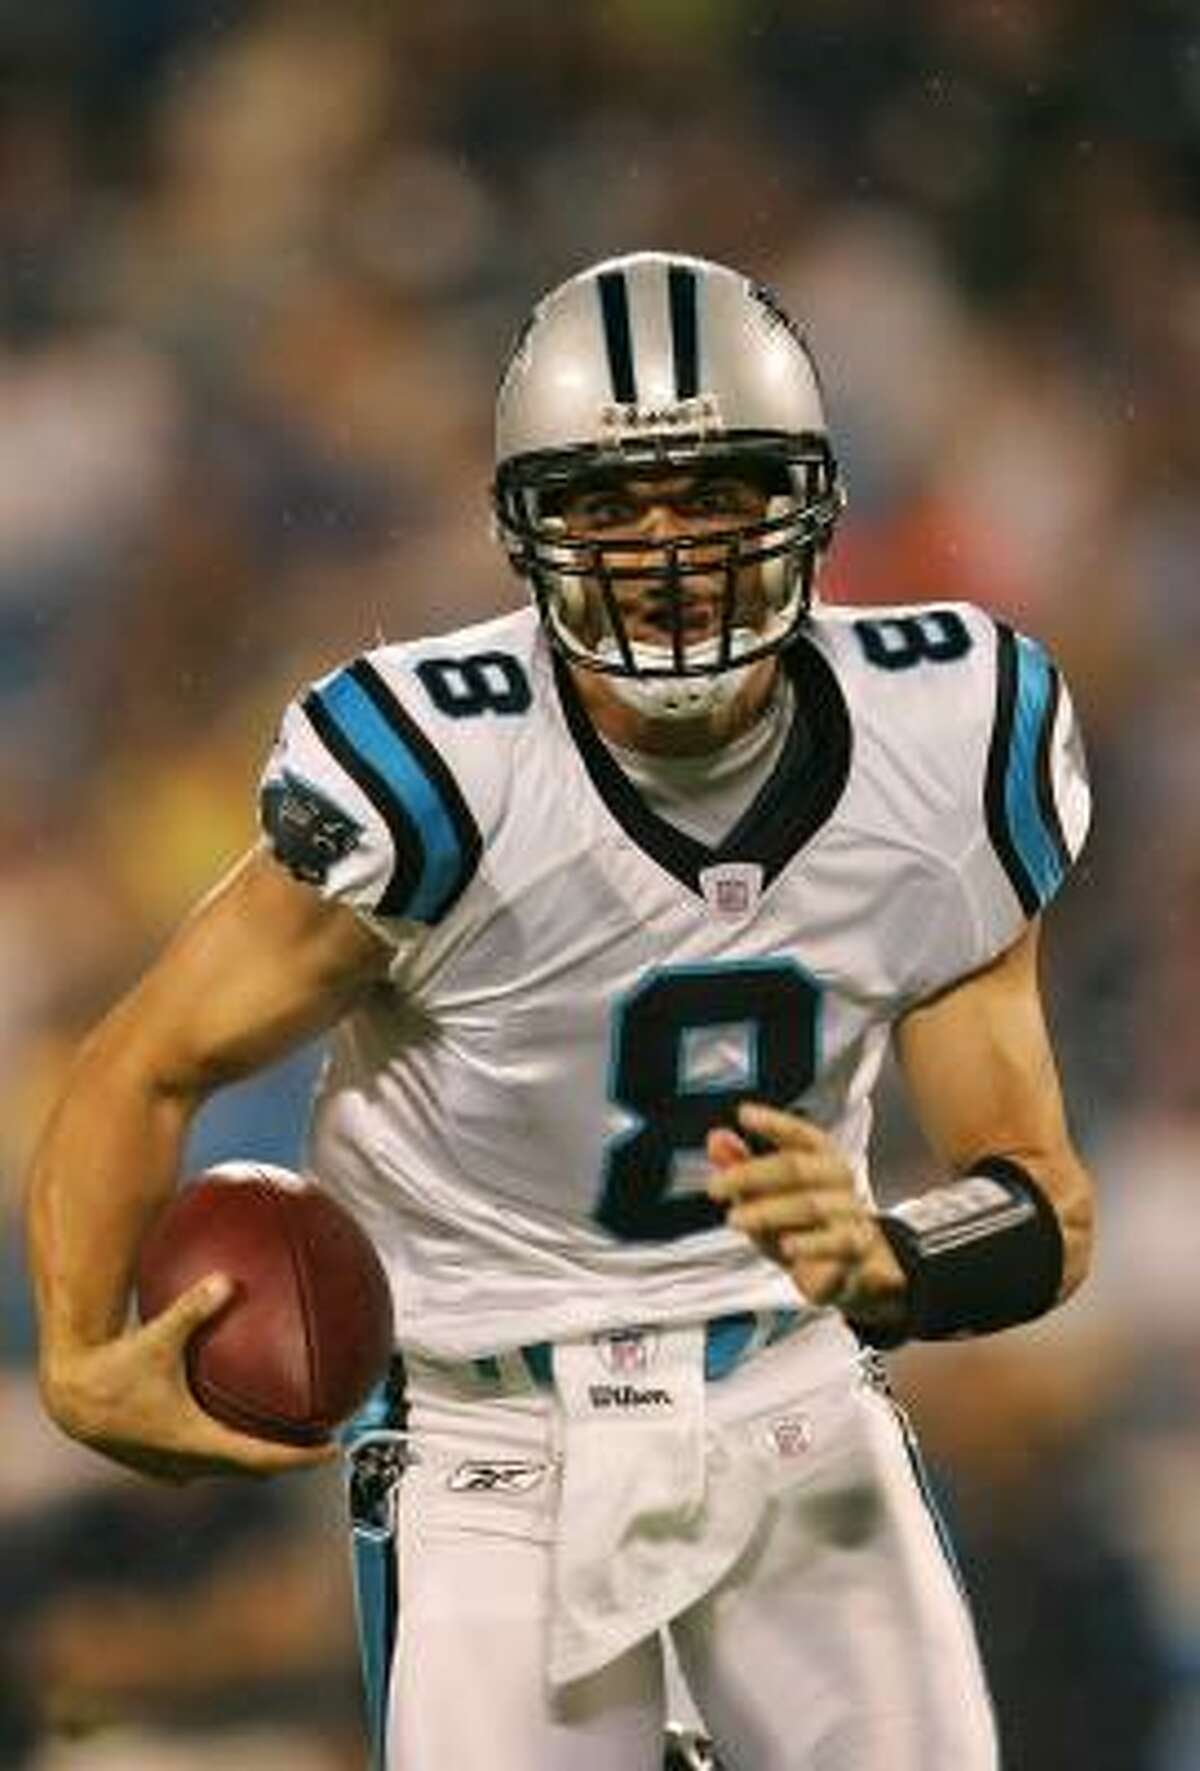 After five frustrating seasons in Houston, David Carr is happy for a second chance in Carolina, where he backs up Jake Delhomme.